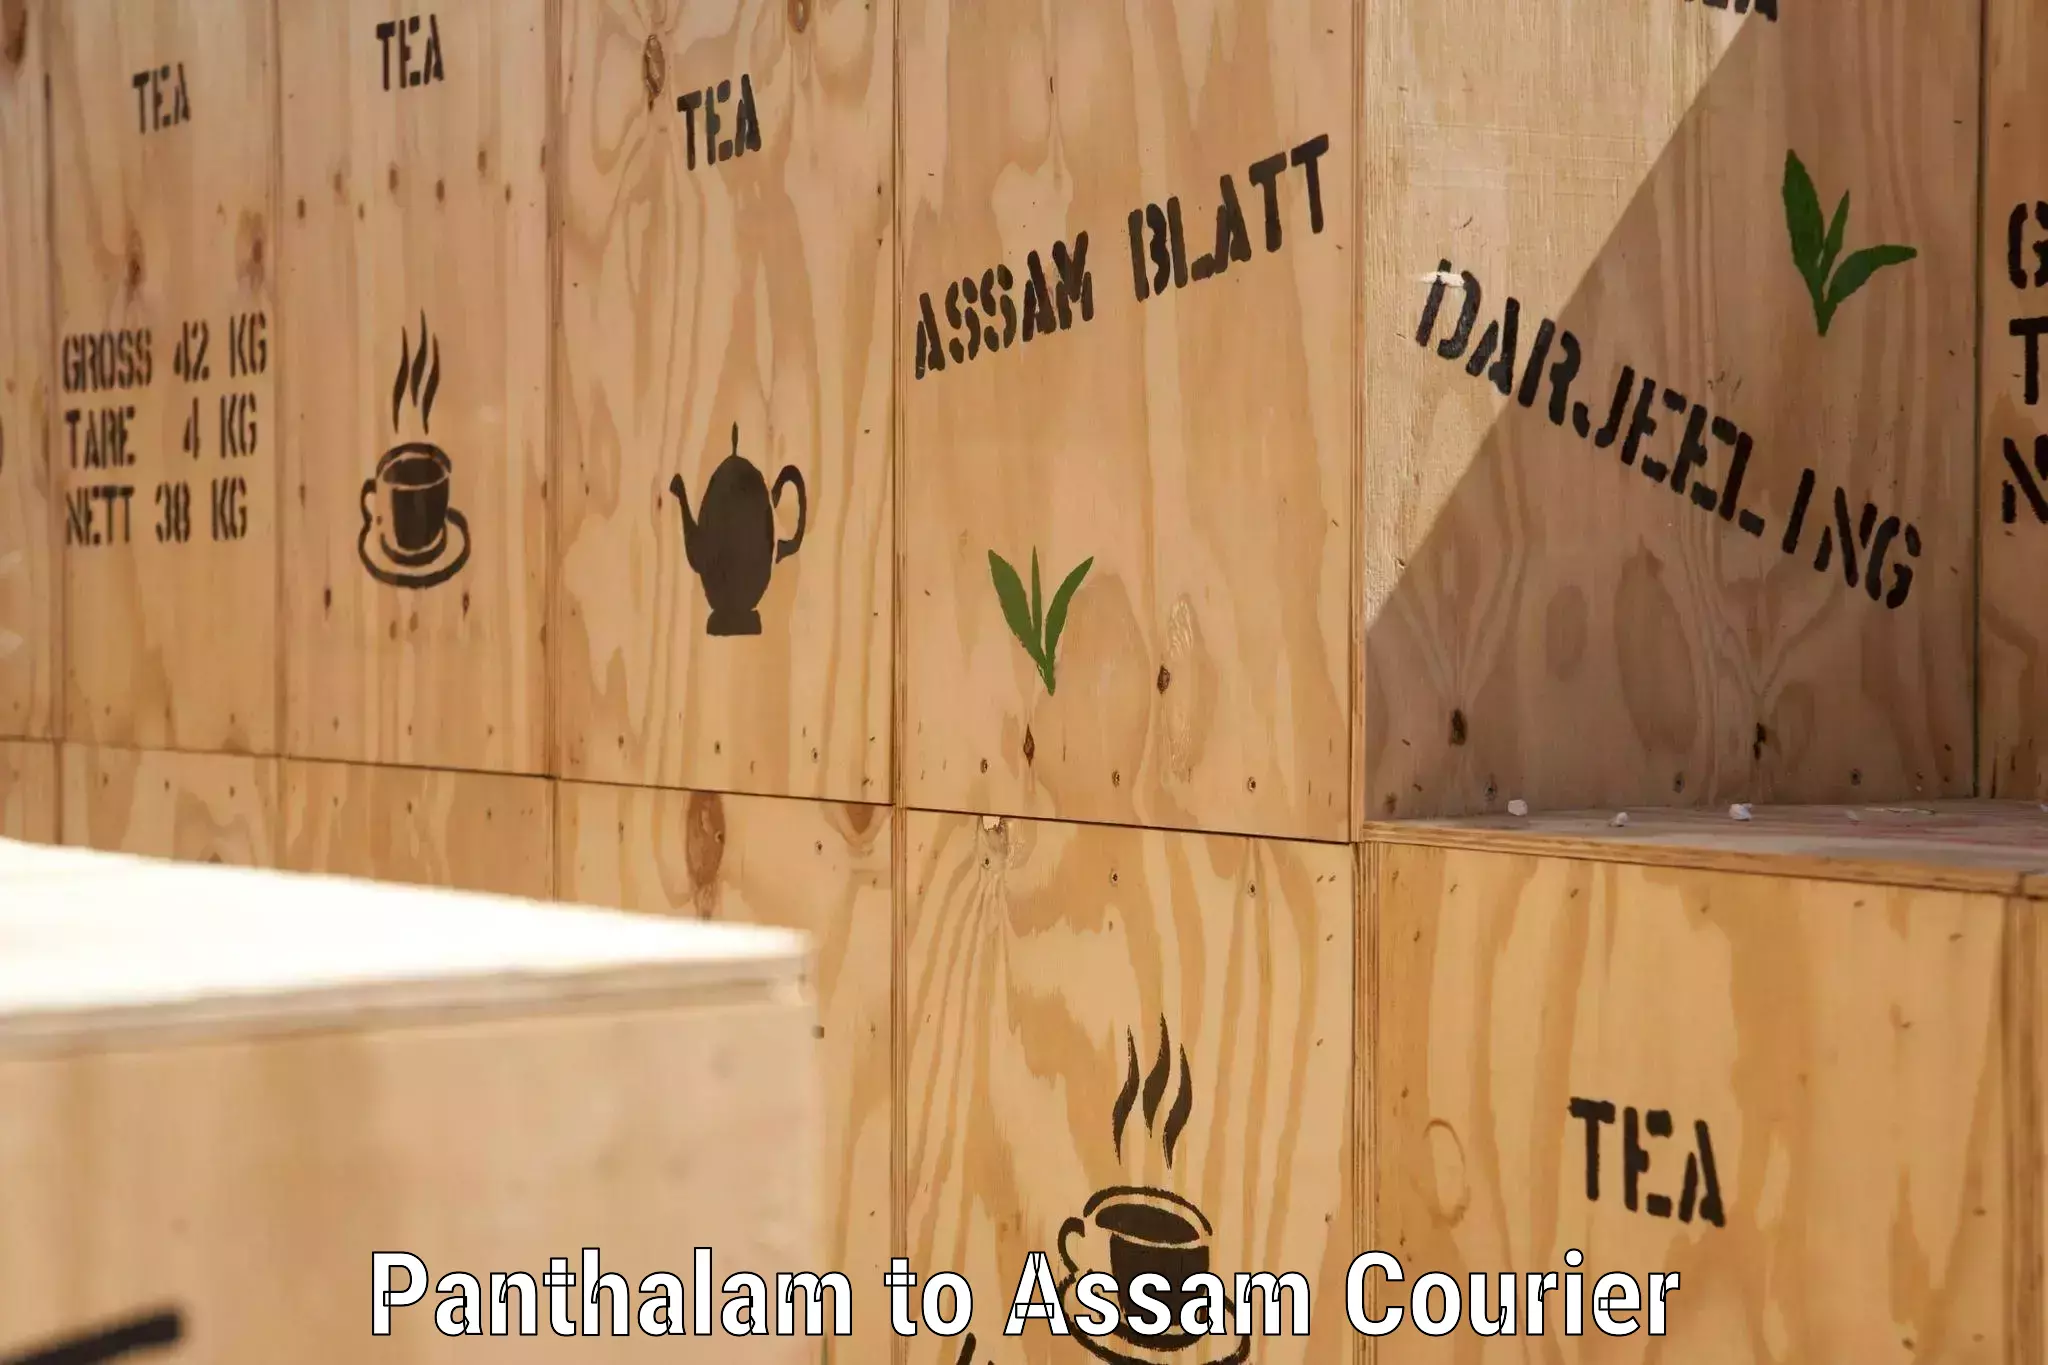 Global shipping solutions Panthalam to Lala Assam